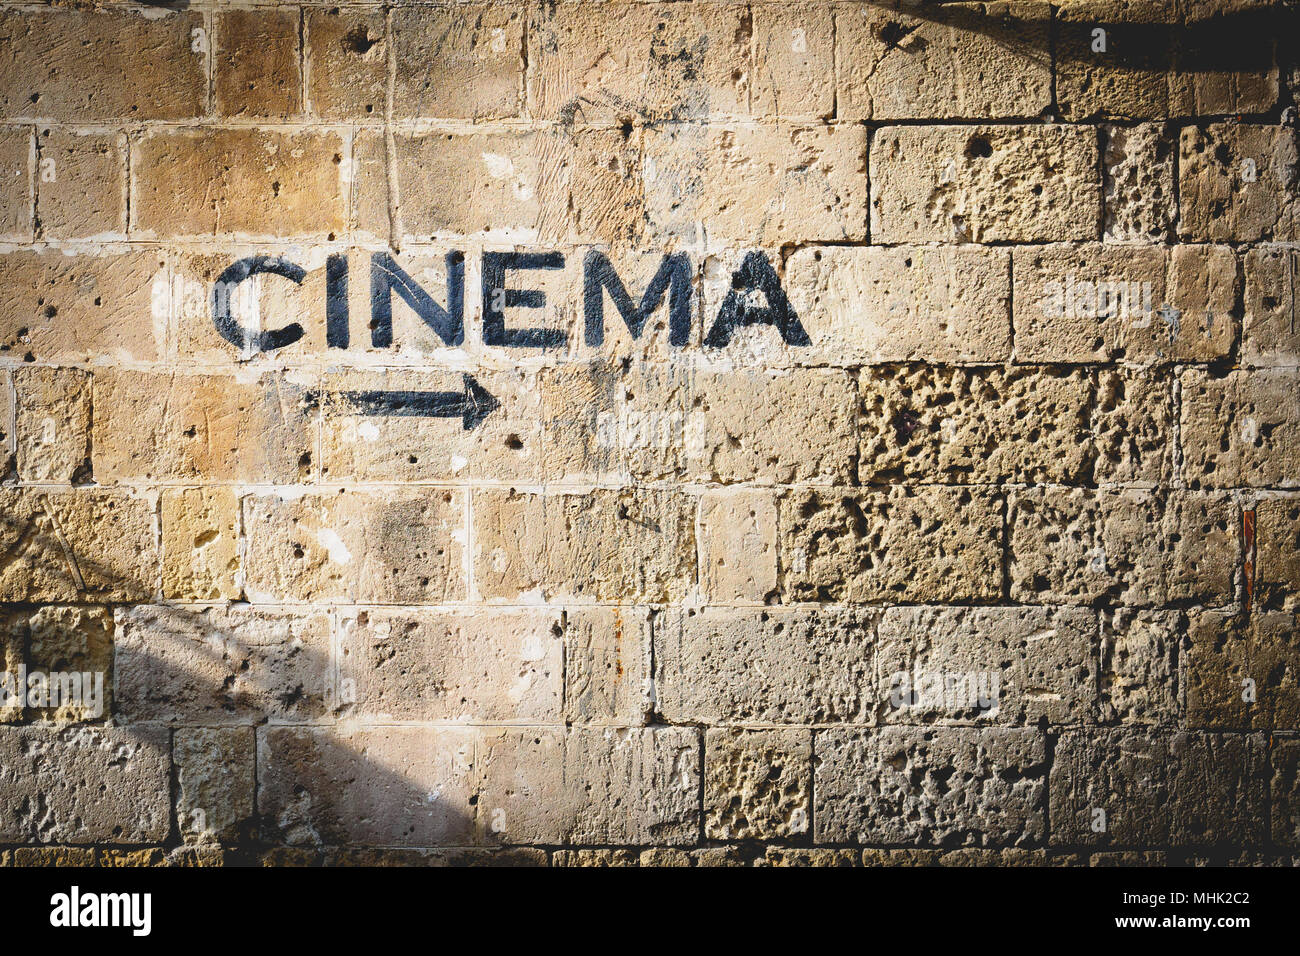 The word 'cinema' and an arrow pointing the right side painted in black on a stone wall. Landscape format. Stock Photo